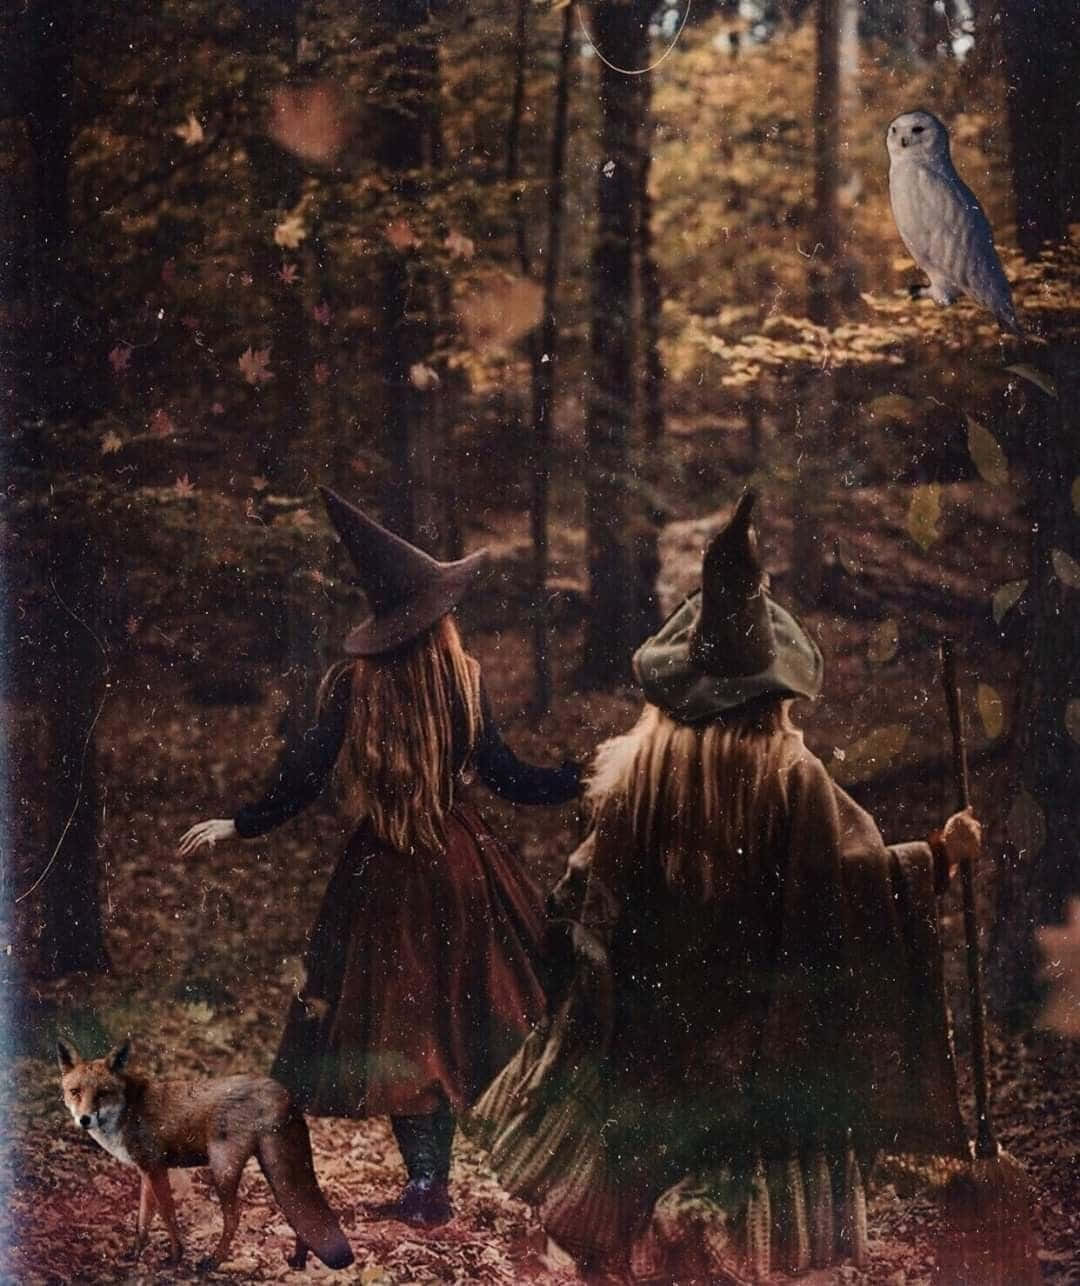 Download Witch Costumes 1080 X 1286 Wallpaper Wallpaper | Wallpapers.com